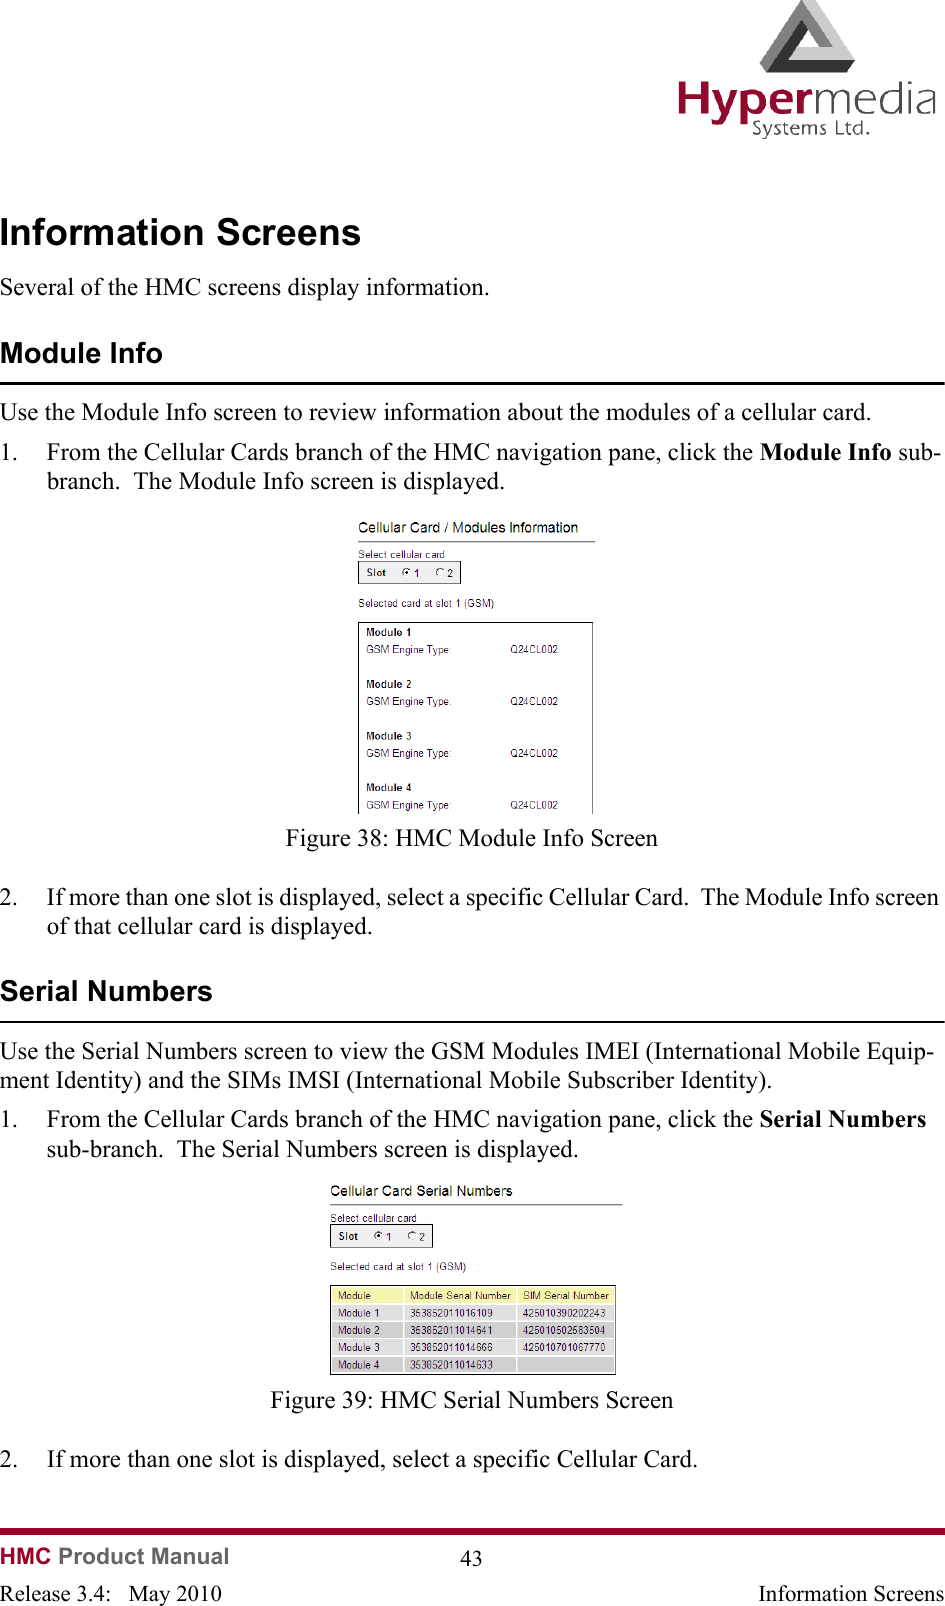 HMC Product Manual  43Release 3.4:   May 2010 Information ScreensInformation ScreensSeveral of the HMC screens display information.Module InfoUse the Module Info screen to review information about the modules of a cellular card.1. From the Cellular Cards branch of the HMC navigation pane, click the Module Info sub-branch.  The Module Info screen is displayed.              Figure 38: HMC Module Info Screen2. If more than one slot is displayed, select a specific Cellular Card.  The Module Info screen of that cellular card is displayed.Serial NumbersUse the Serial Numbers screen to view the GSM Modules IMEI (International Mobile Equip-ment Identity) and the SIMs IMSI (International Mobile Subscriber Identity).1. From the Cellular Cards branch of the HMC navigation pane, click the Serial Numbers sub-branch.  The Serial Numbers screen is displayed.              Figure 39: HMC Serial Numbers Screen2. If more than one slot is displayed, select a specific Cellular Card.